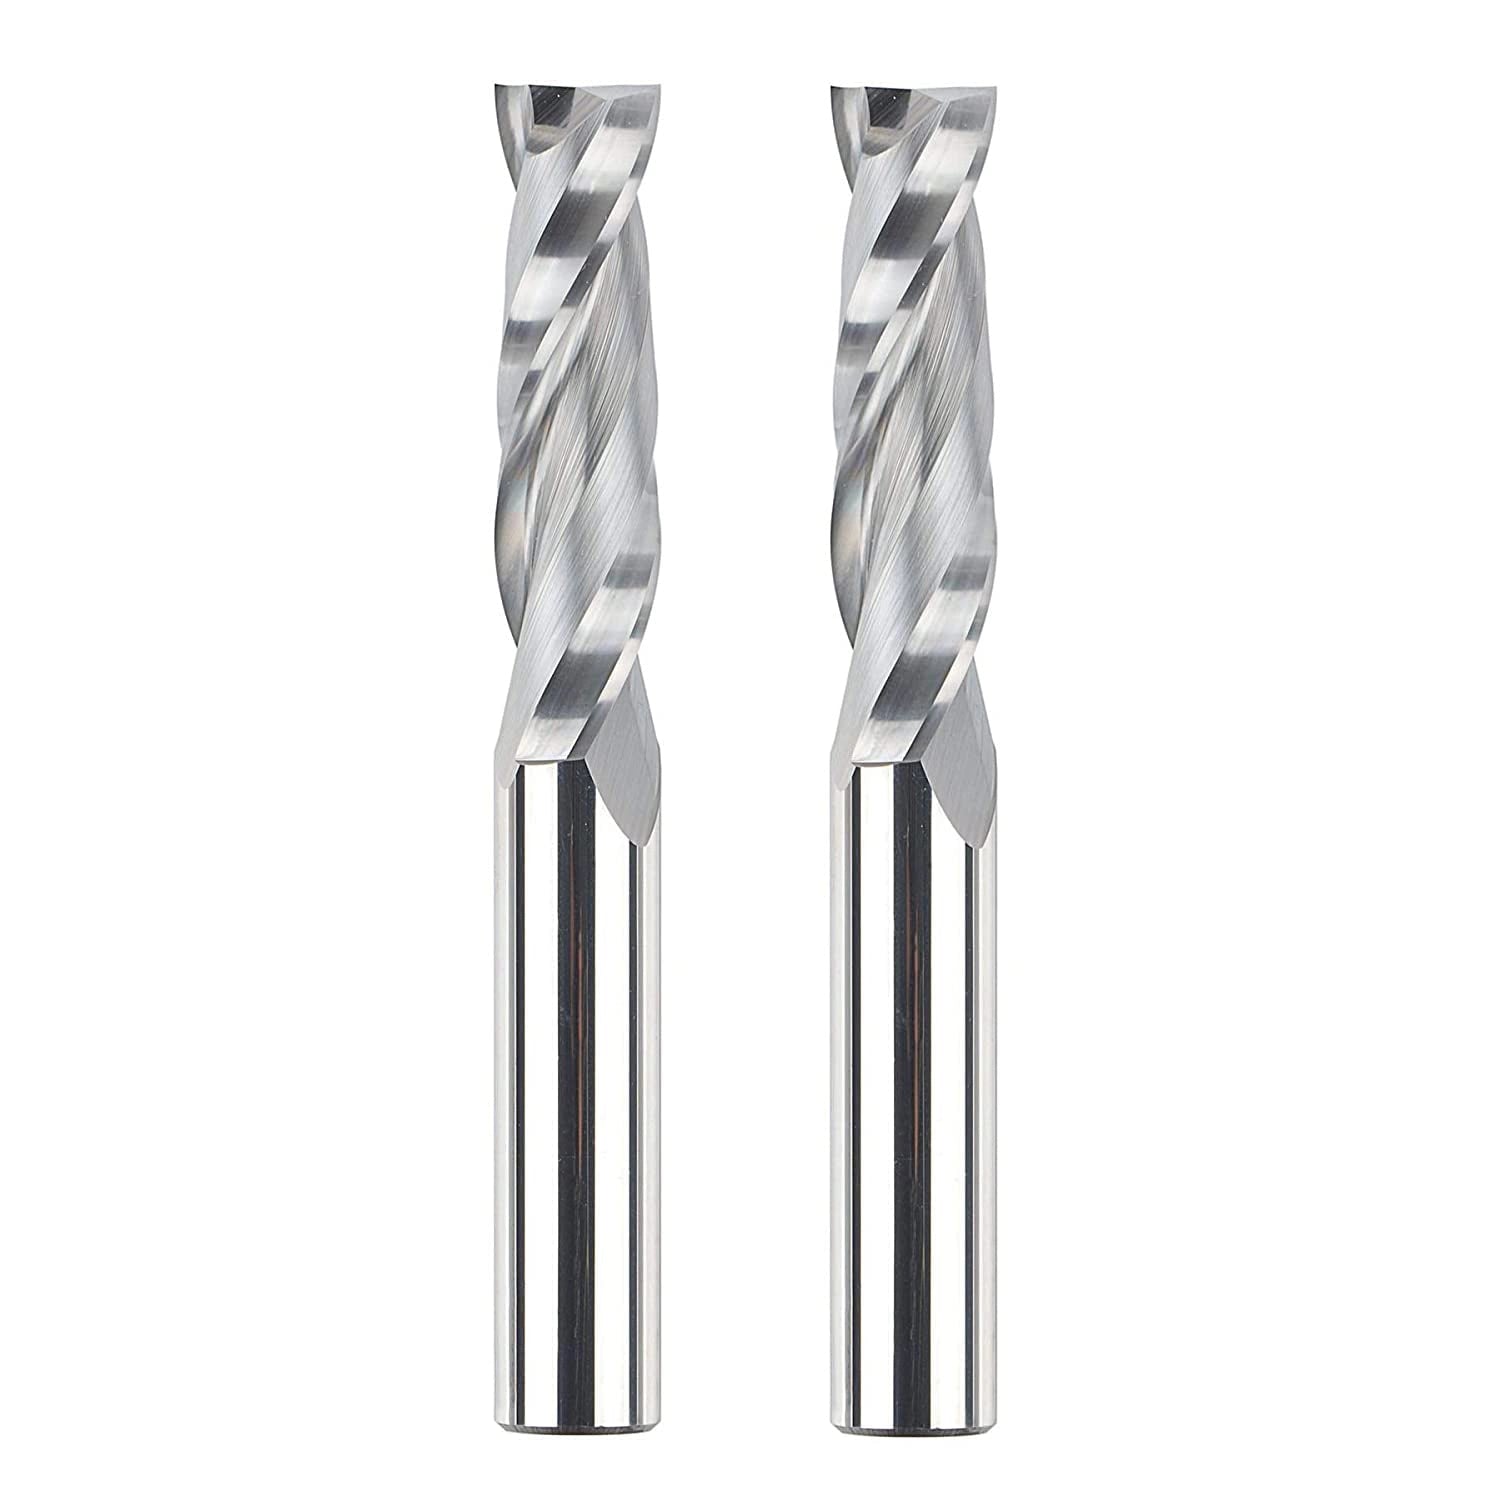 SpeTool W04012 SC Spiral Plunge 1/2" Dia x 1/2" Shank x 2" Cutting Length 4" Extra Long 2 Flute Up-Cut Router Bit